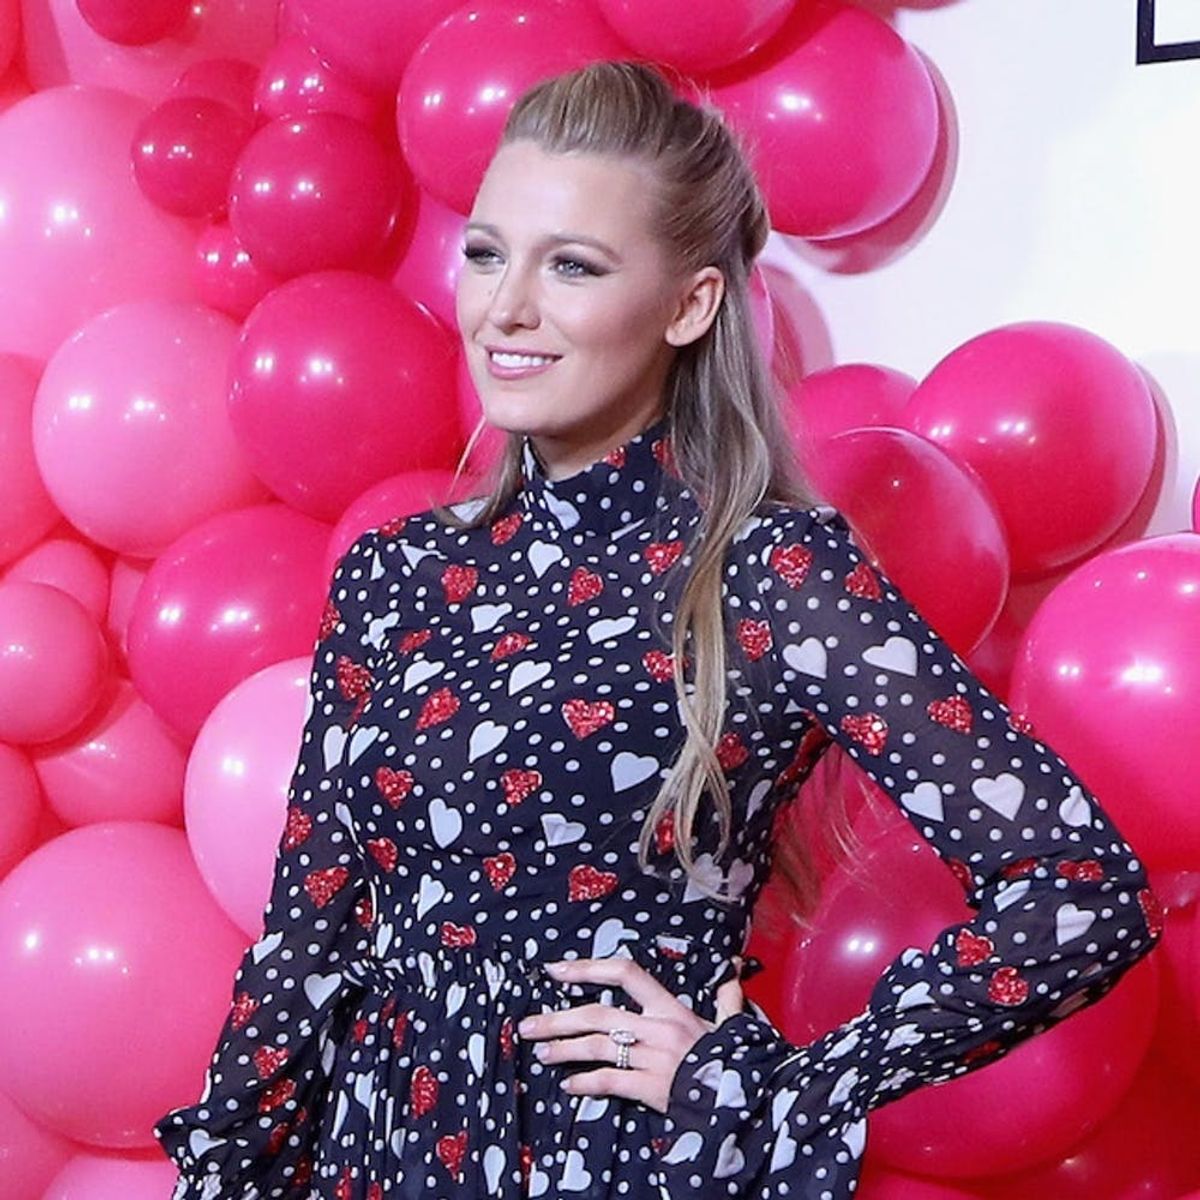 Behold, Blake Lively’s Heart-Shaped Hairstyle You Need to Copy for Valentine’s Day